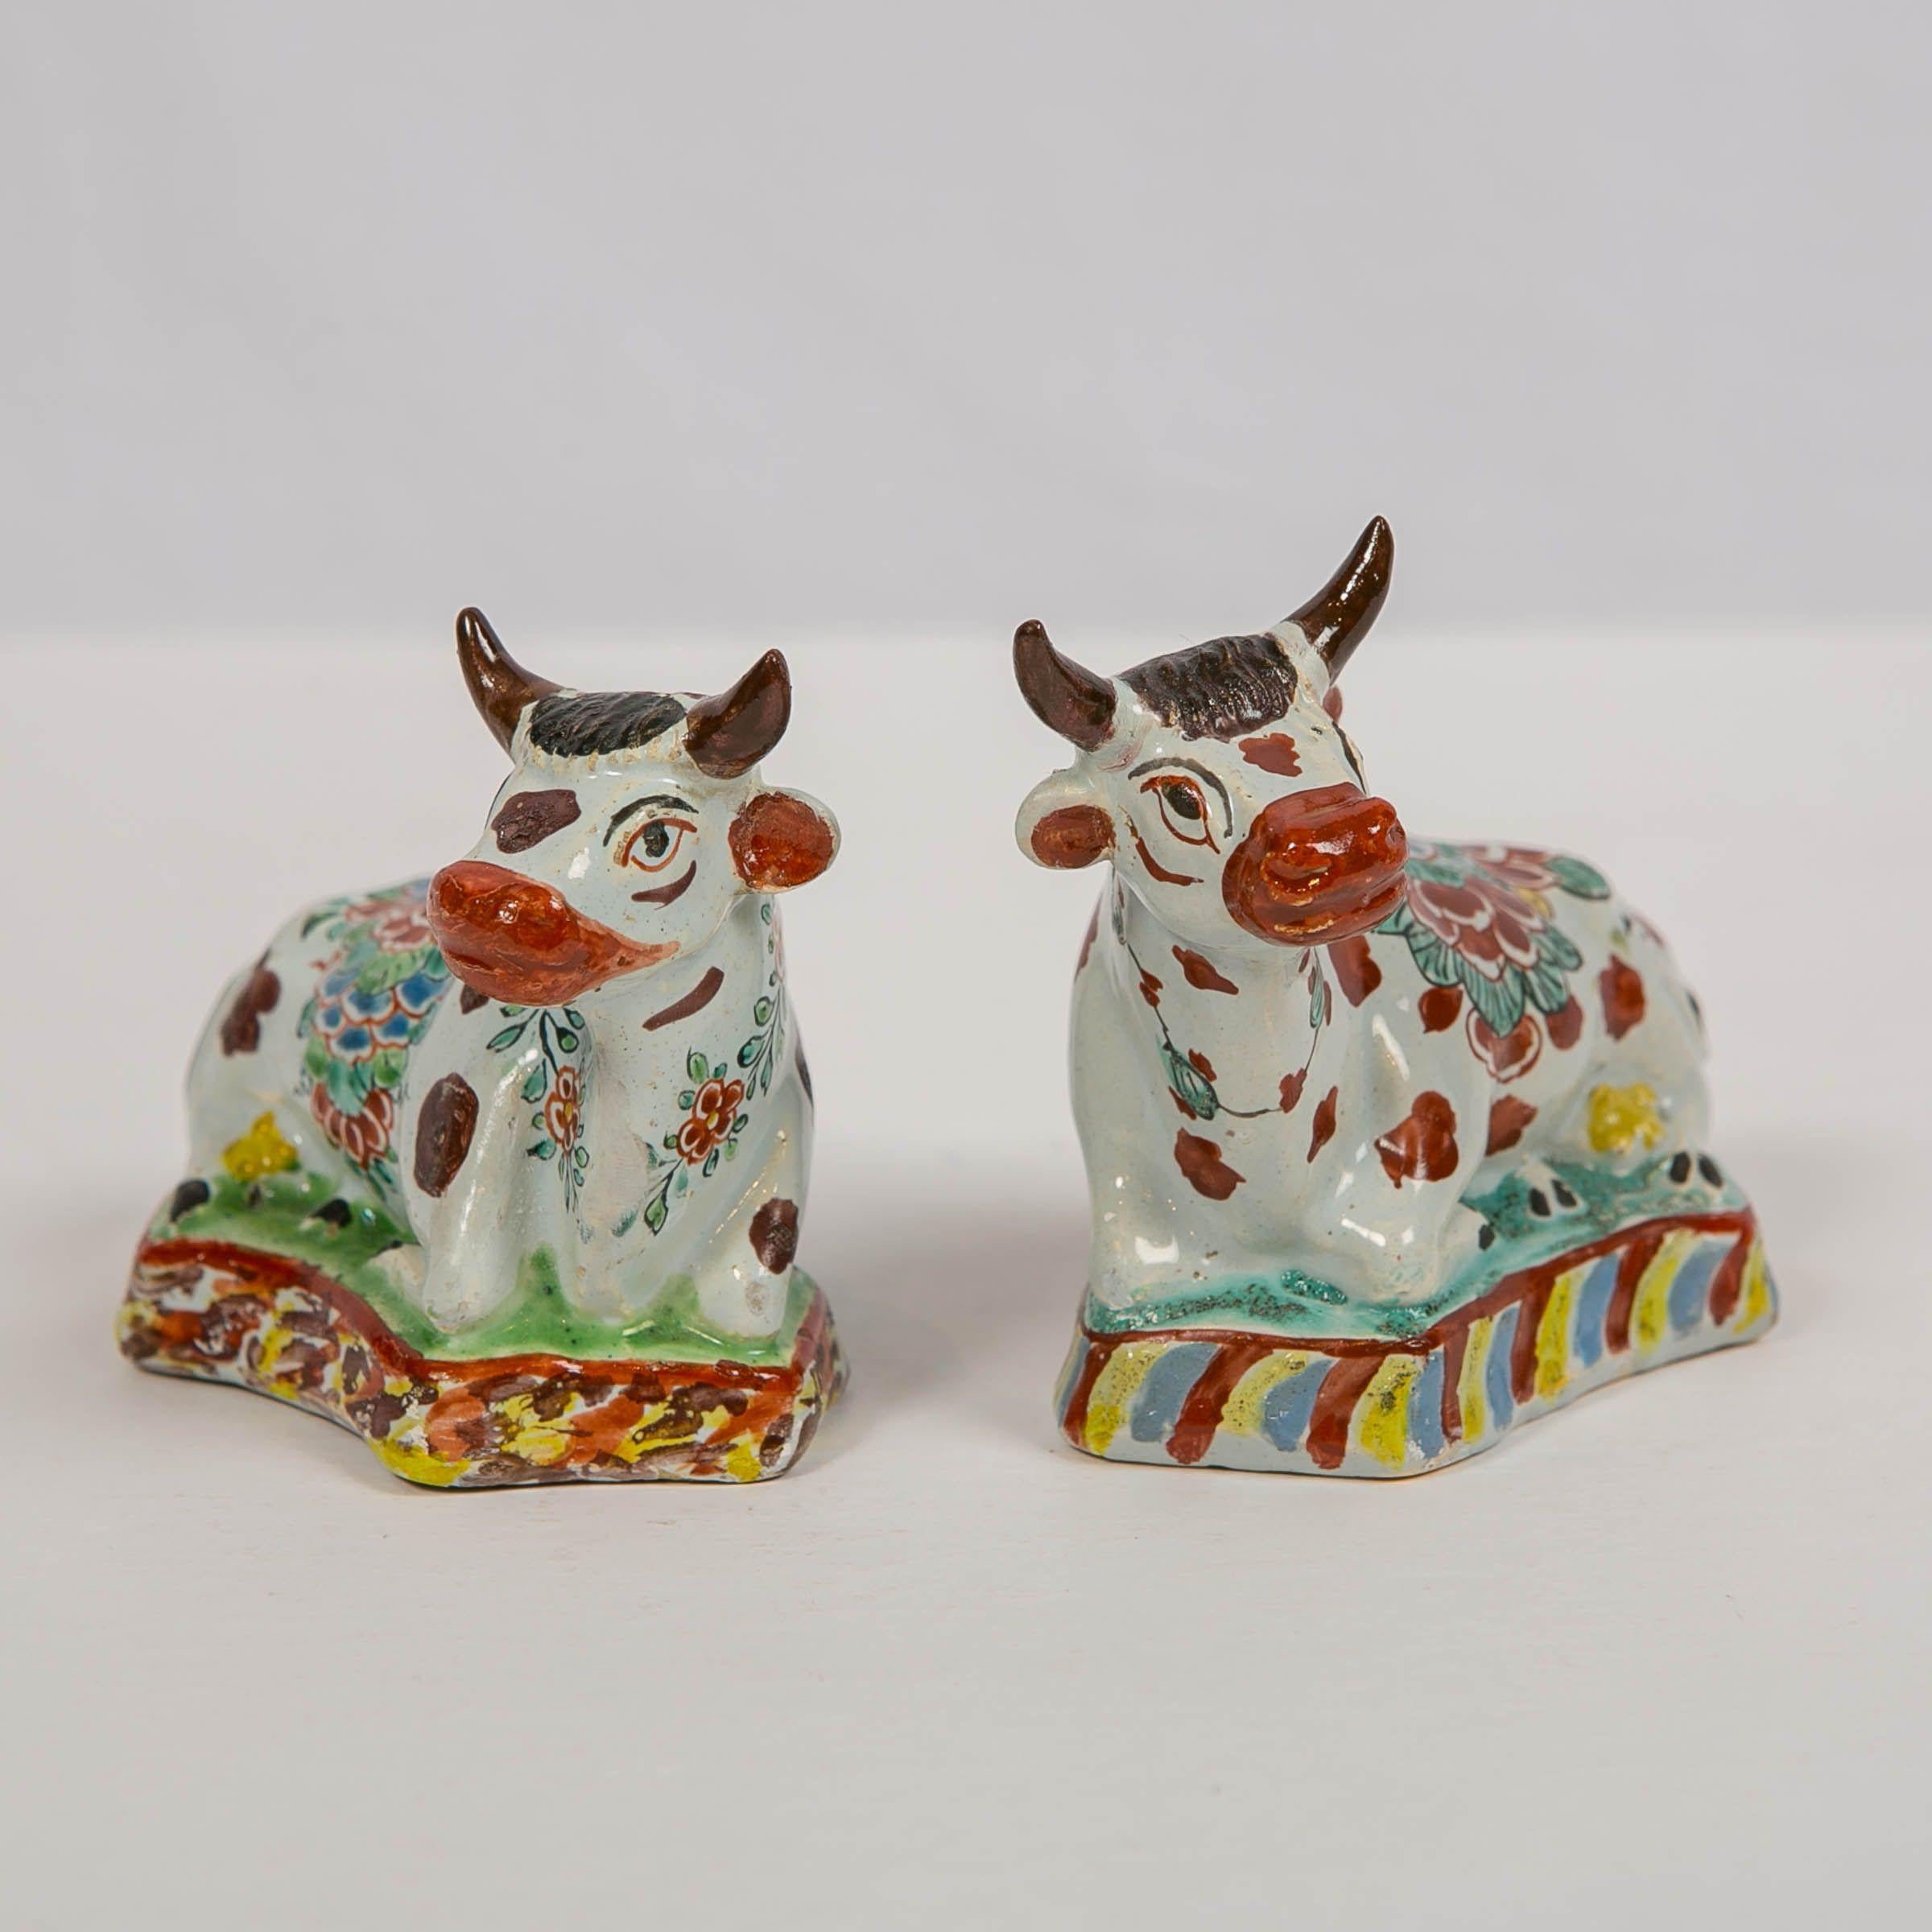 Hand-Painted Pair of Dutch Delft Cows Painted in Polychrome Petit Feu Colors Made circa 1760